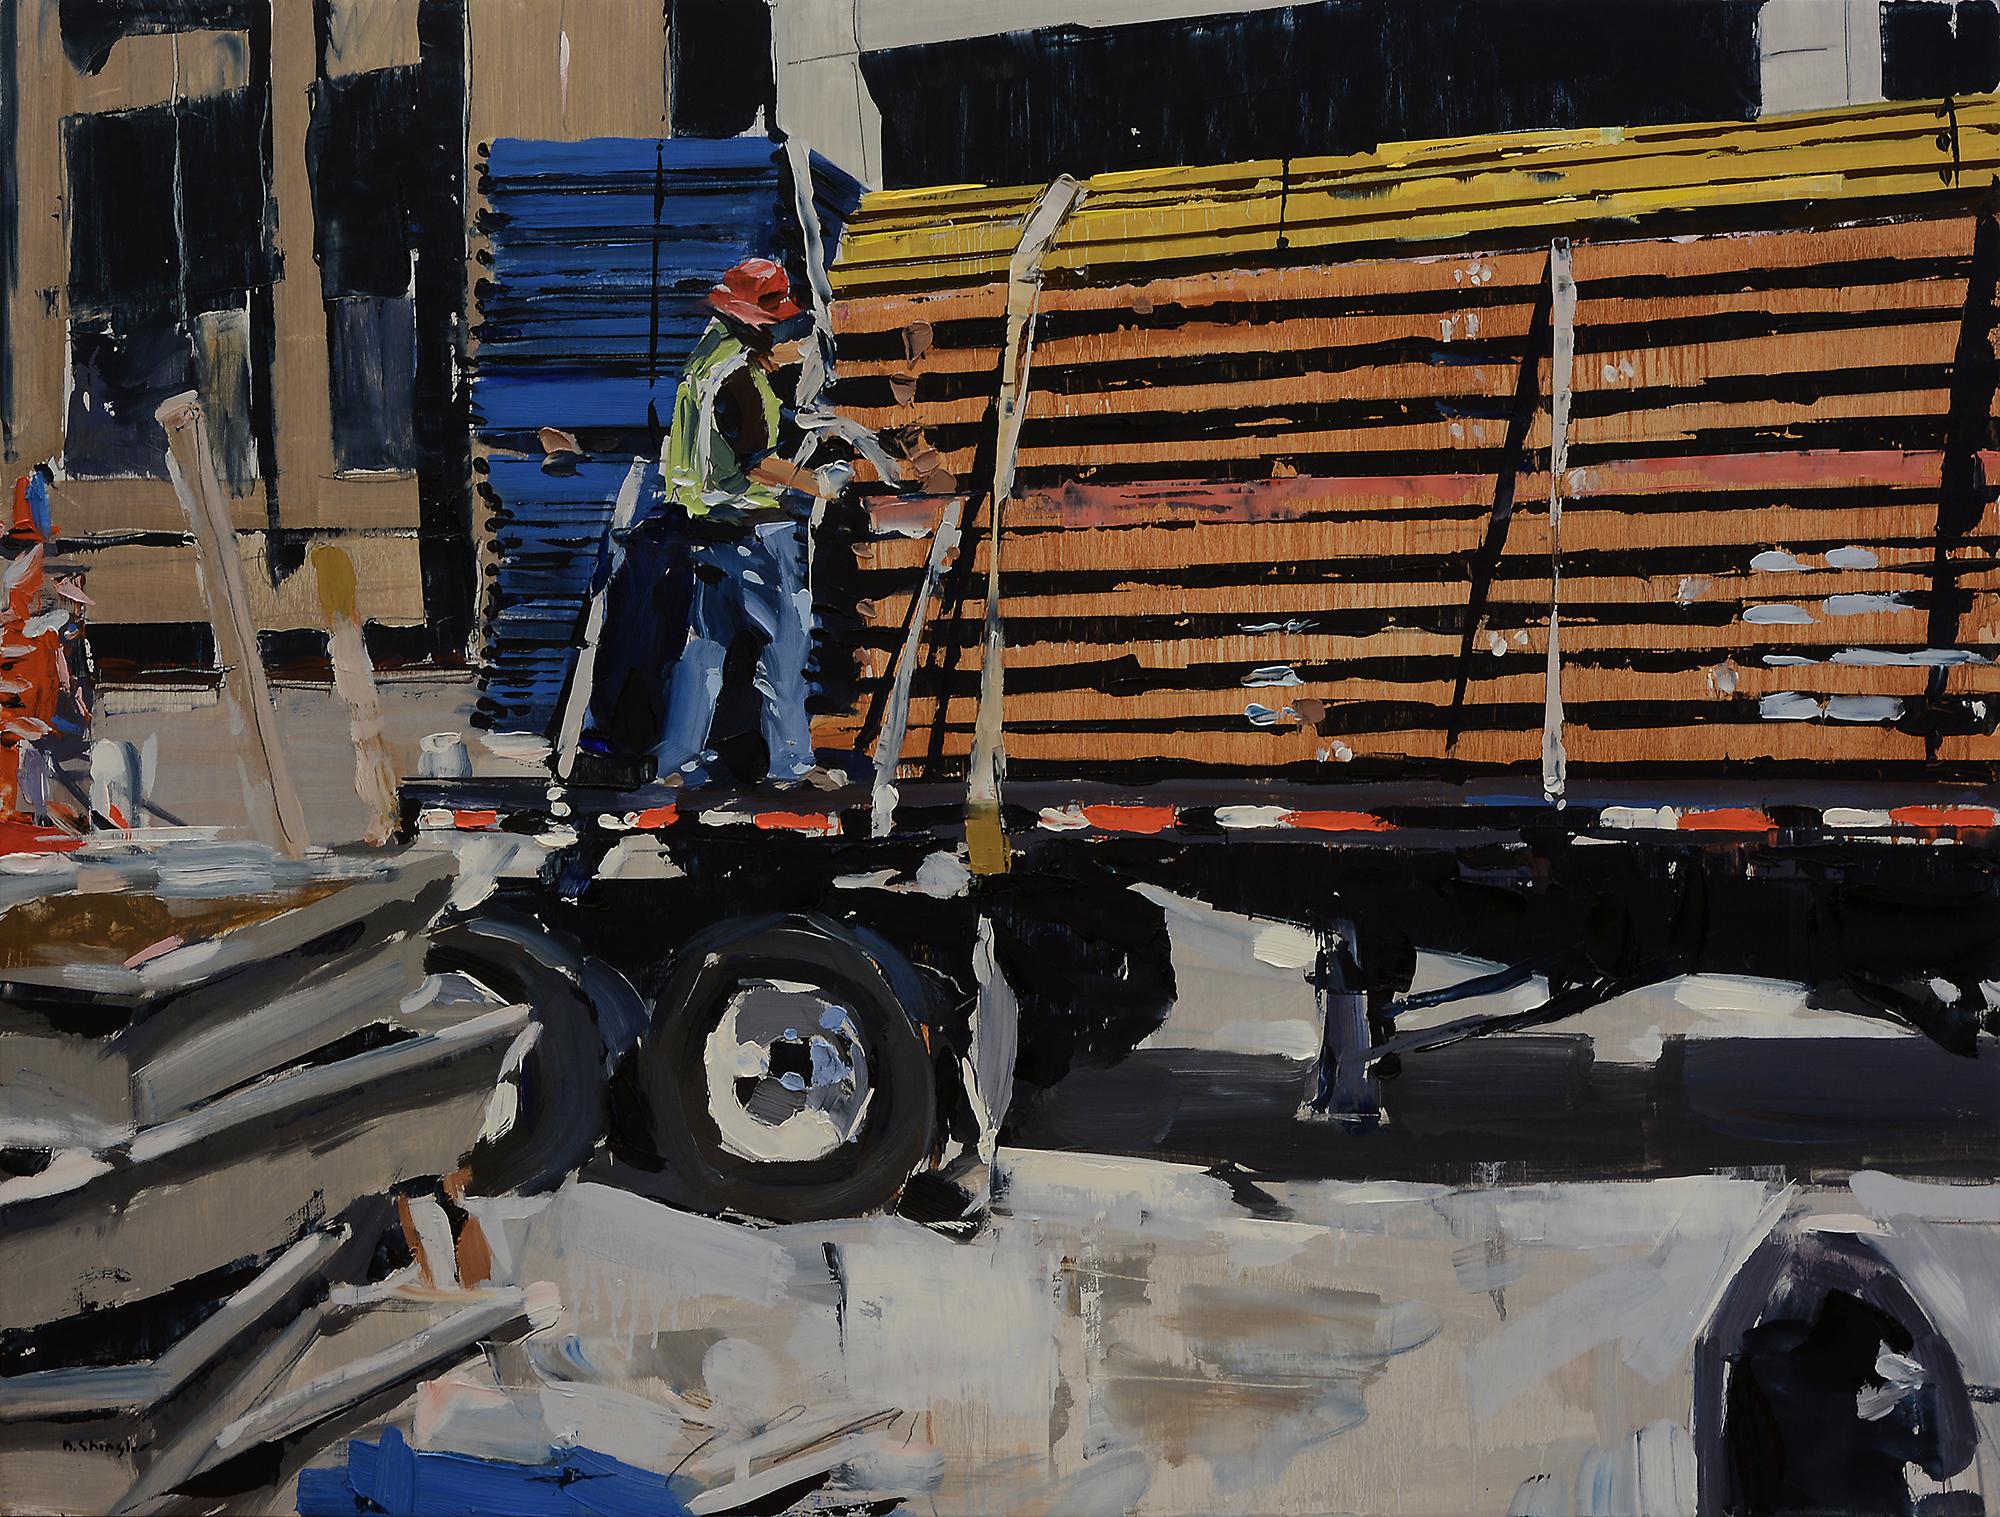 "Man on Truck" Oil Painting